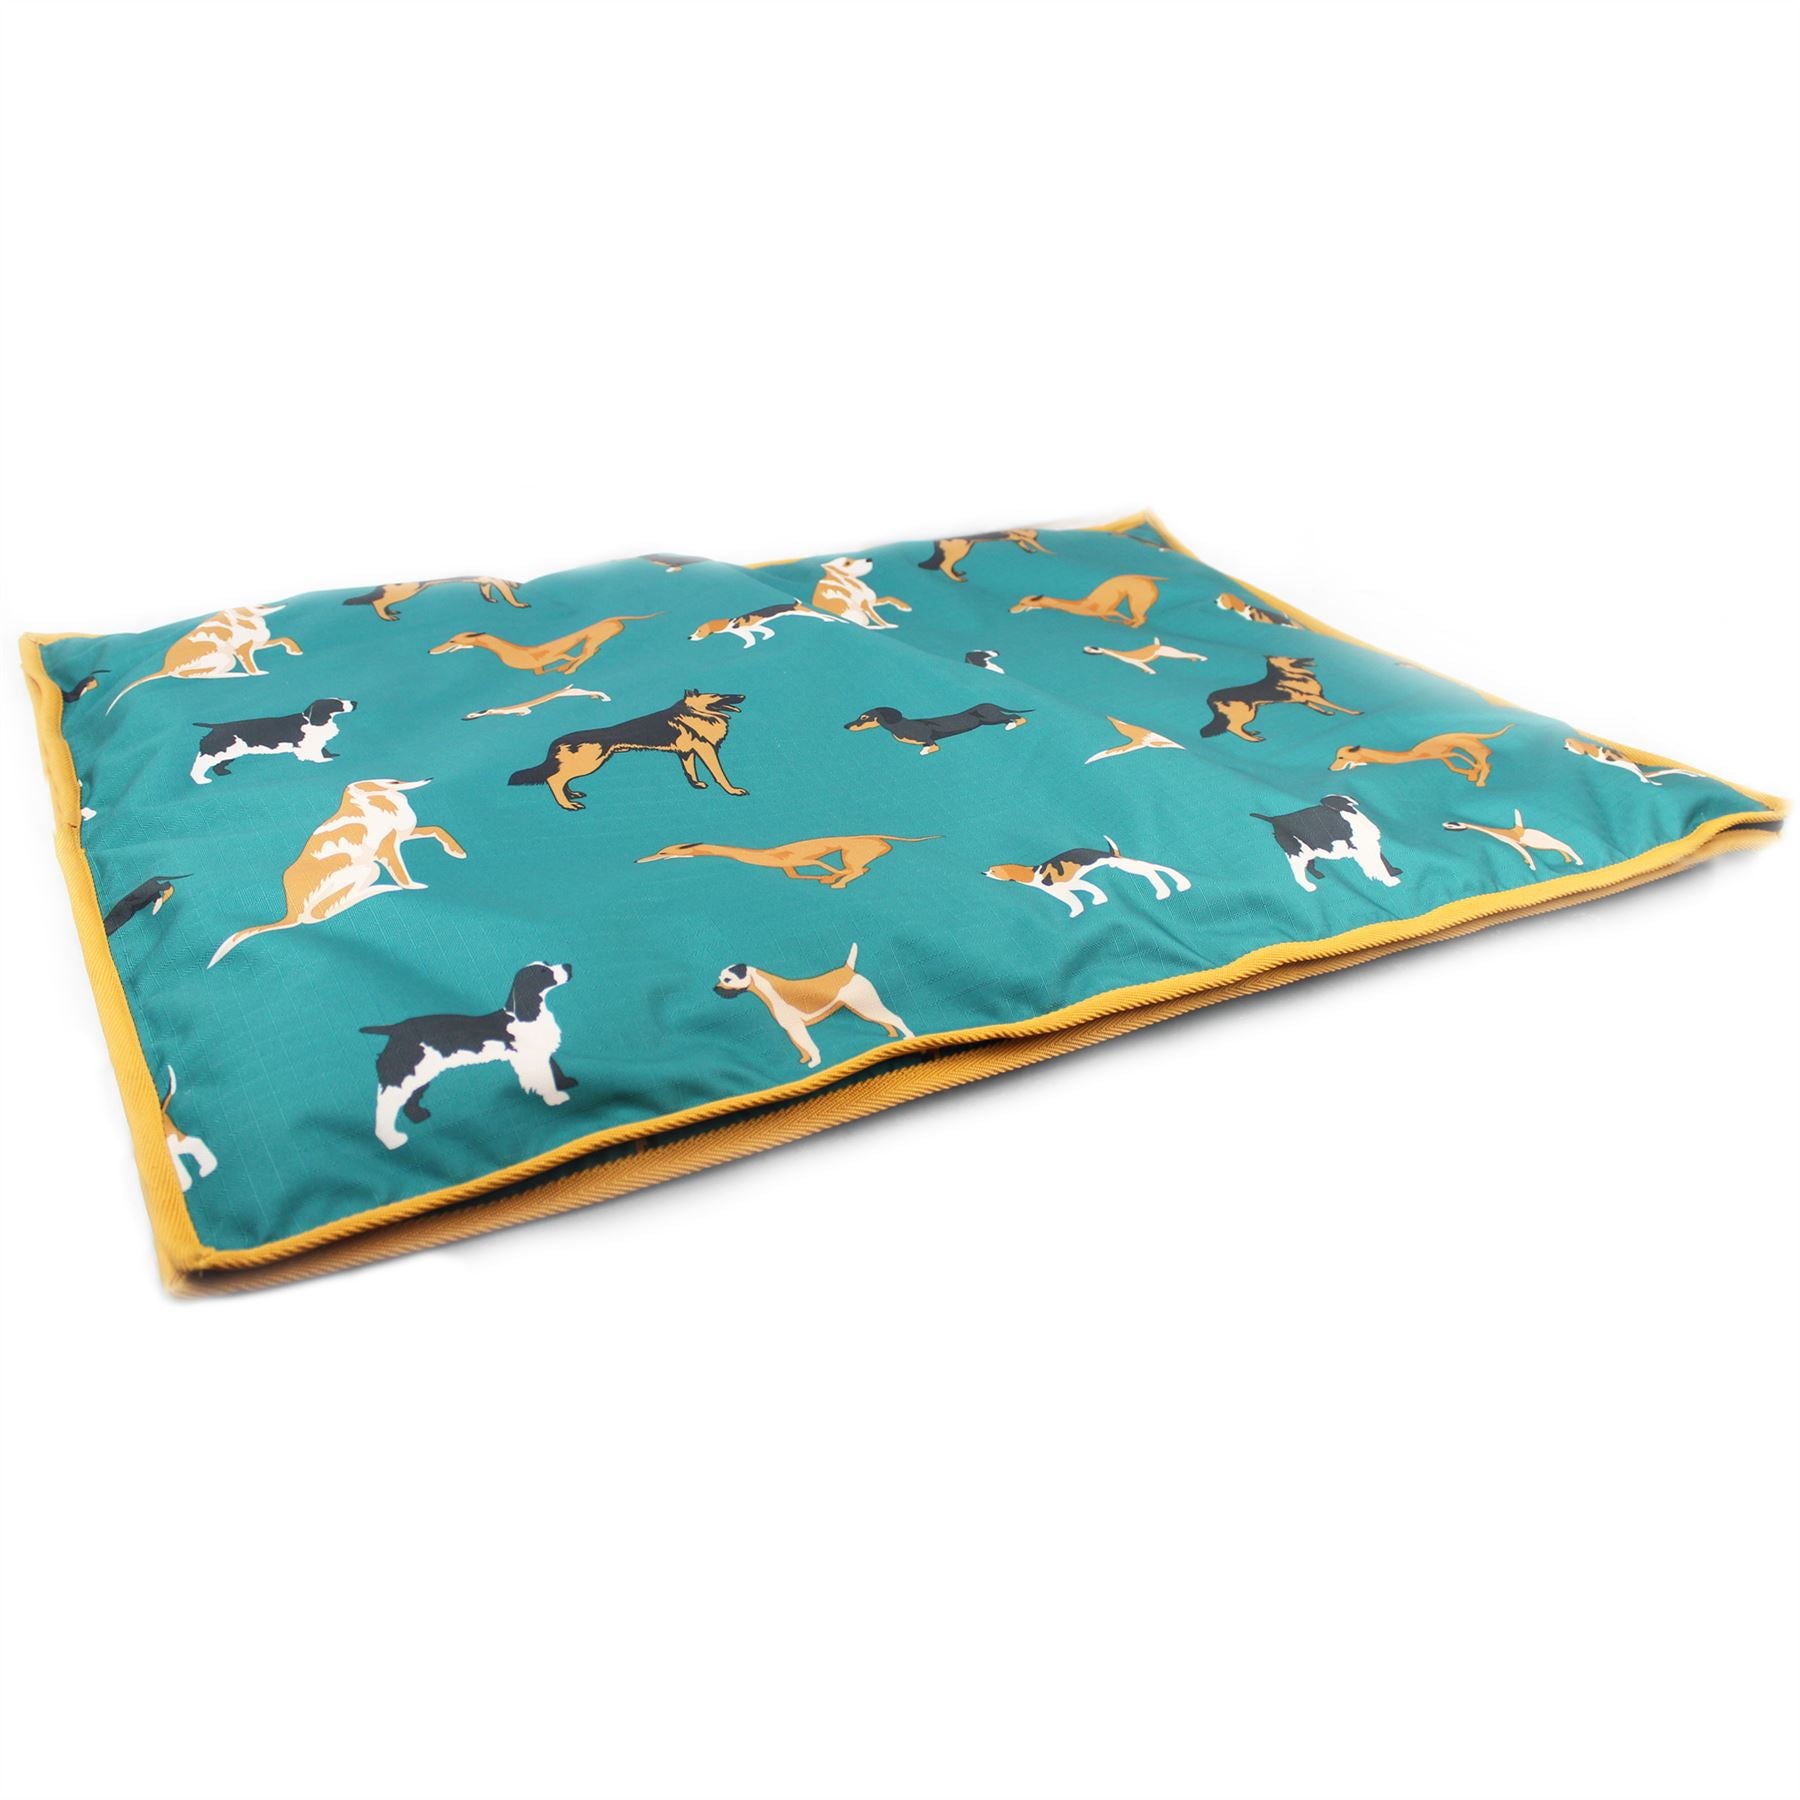 Gallop Equestrian Dogs Print Dog Bed - Just Horse Riders